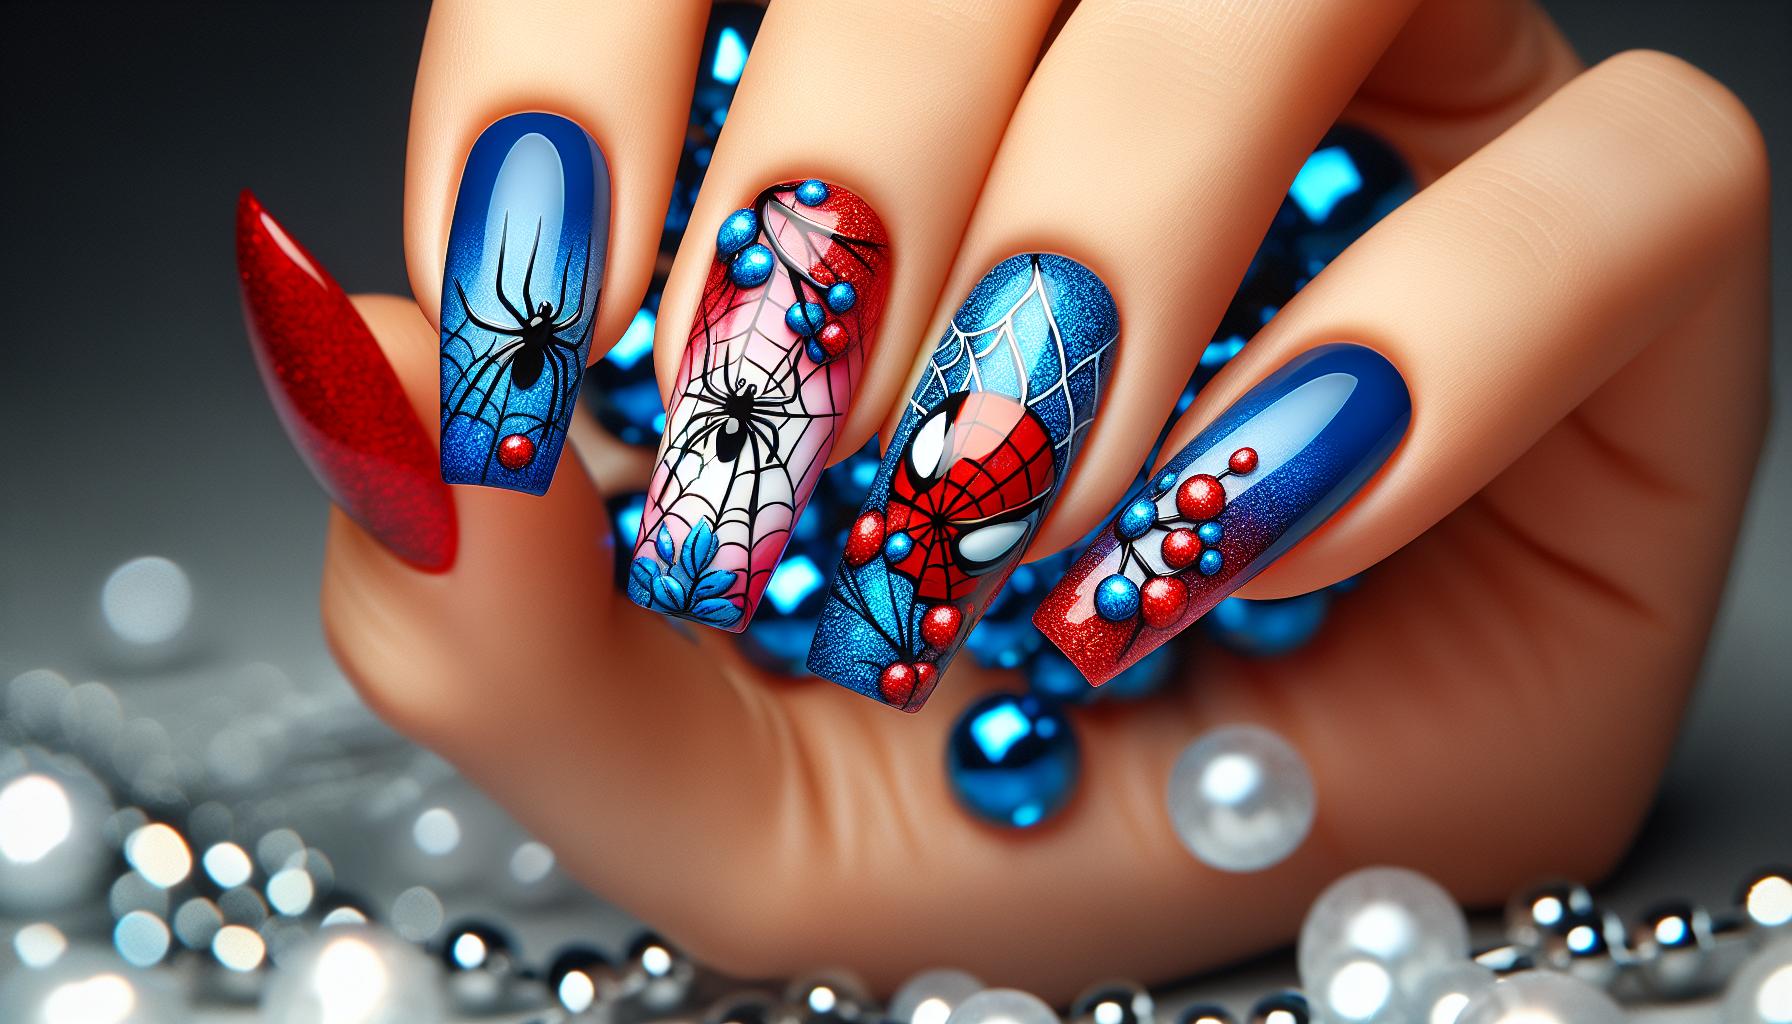 The Amazing Spider-man 2 Nails | dottyaboutnails